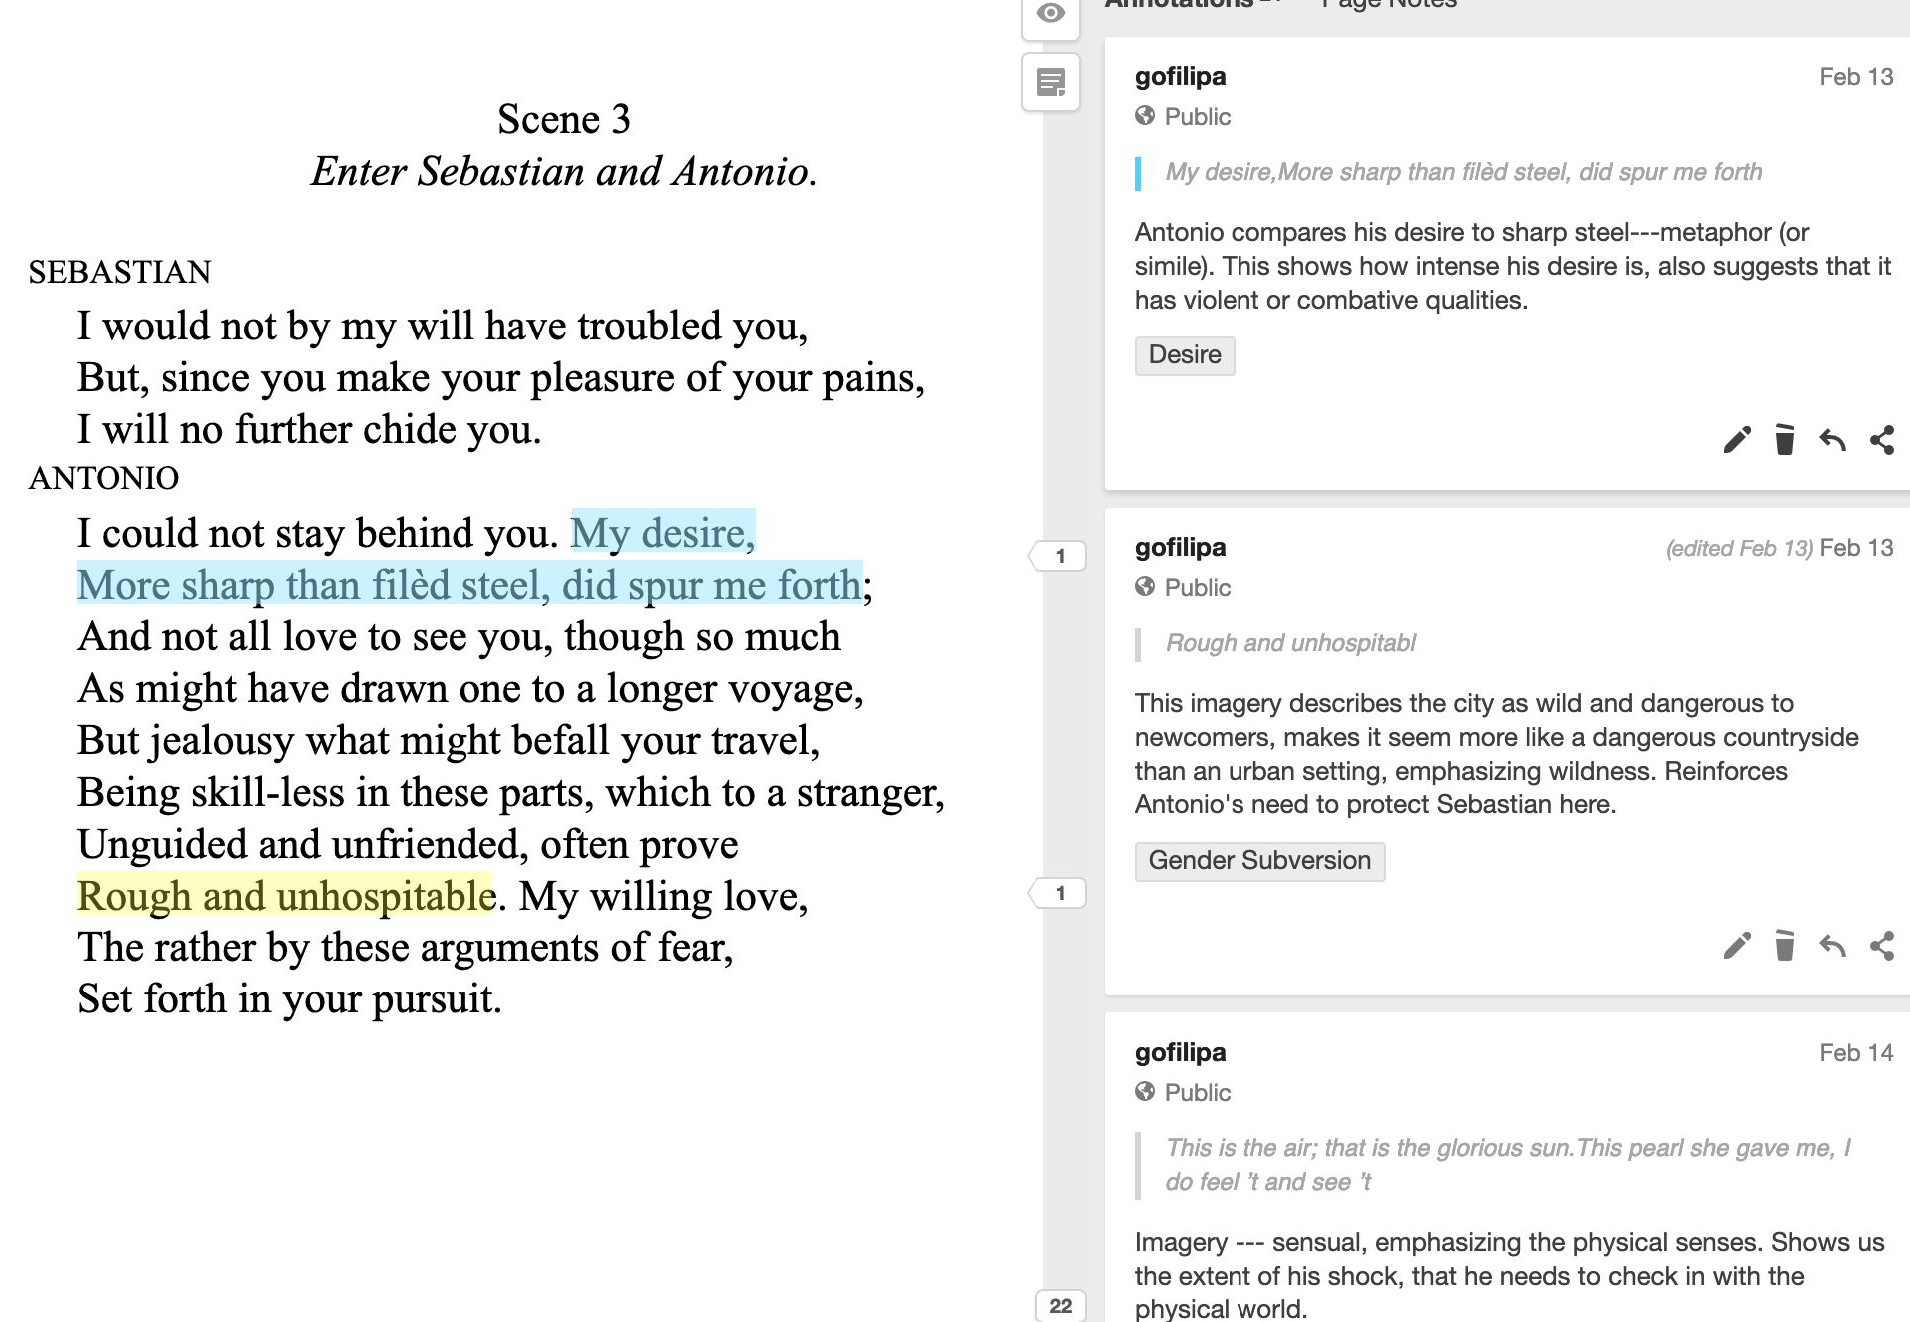 Image using hypothesis to highlight and comment on textual elements in Shakespeare